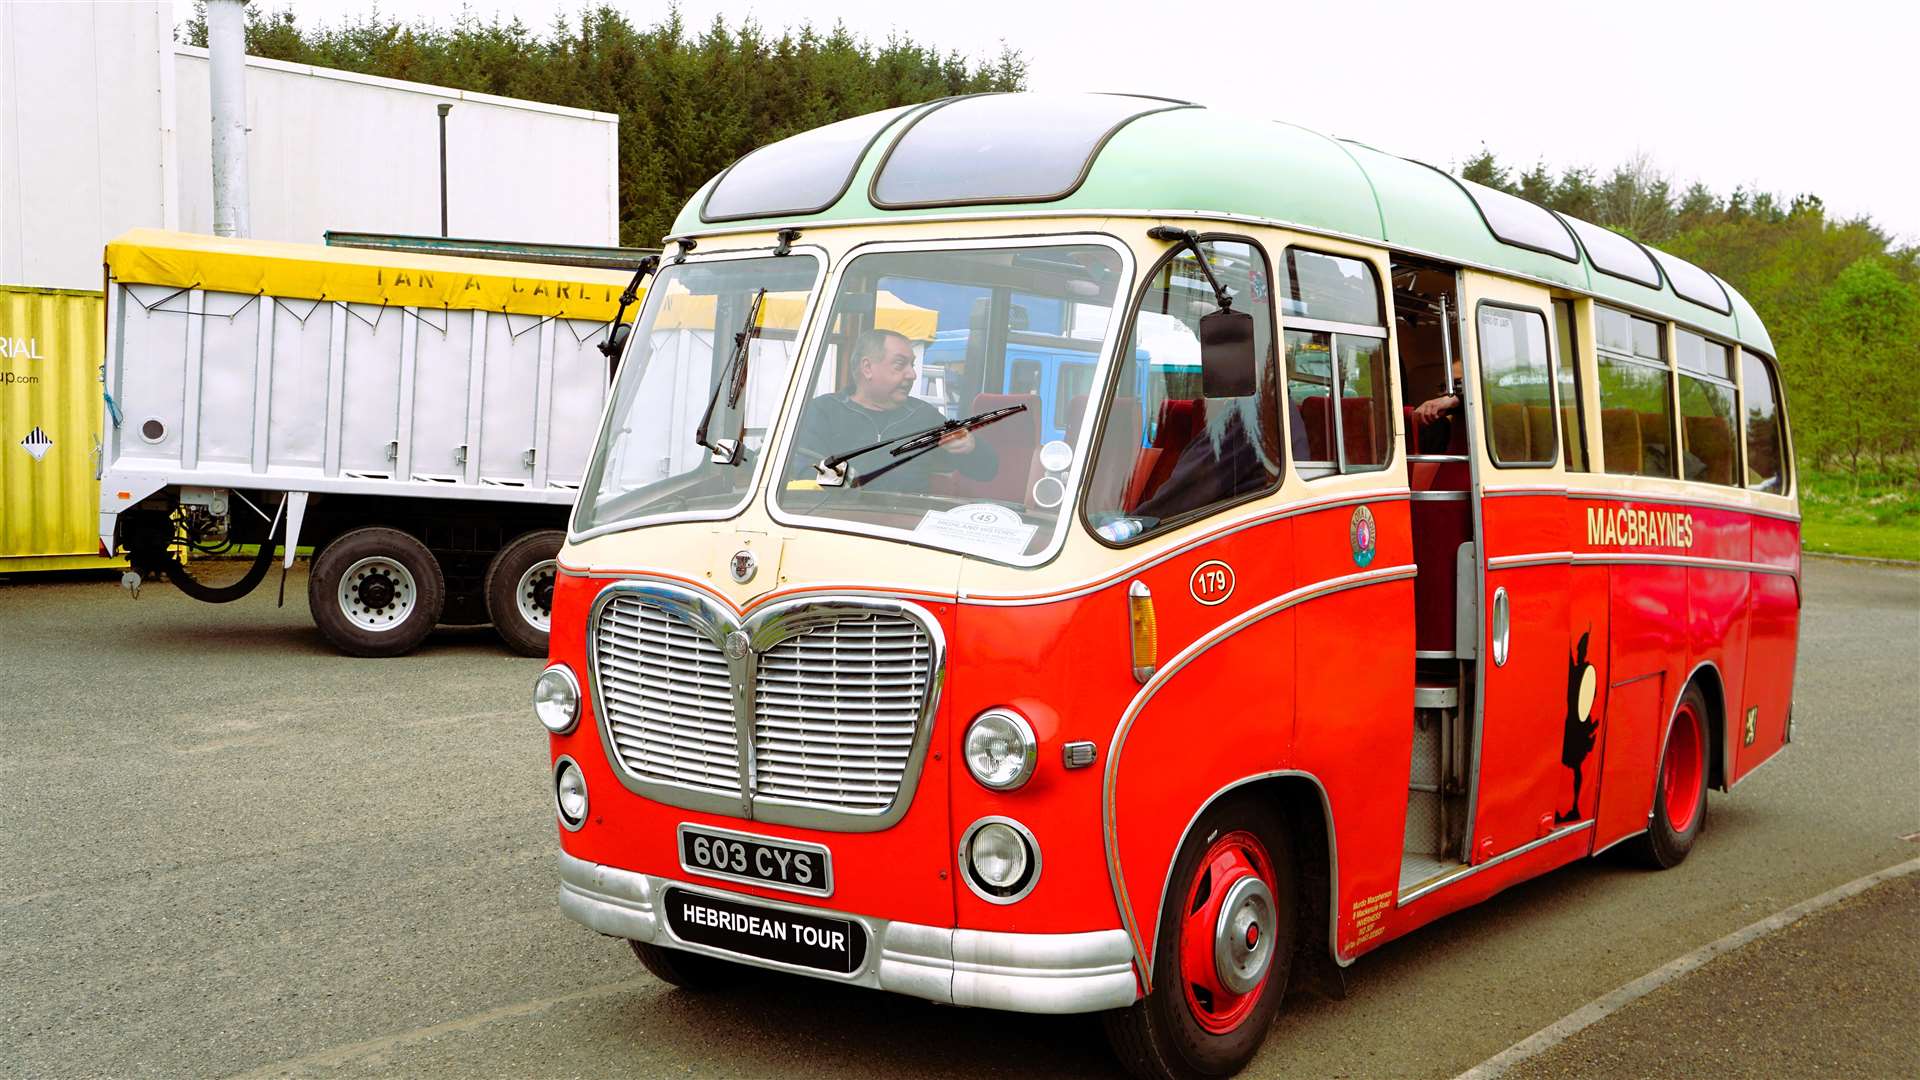 The Macbraynes historic bus dating from the early 1960s in action. Picture: DGS